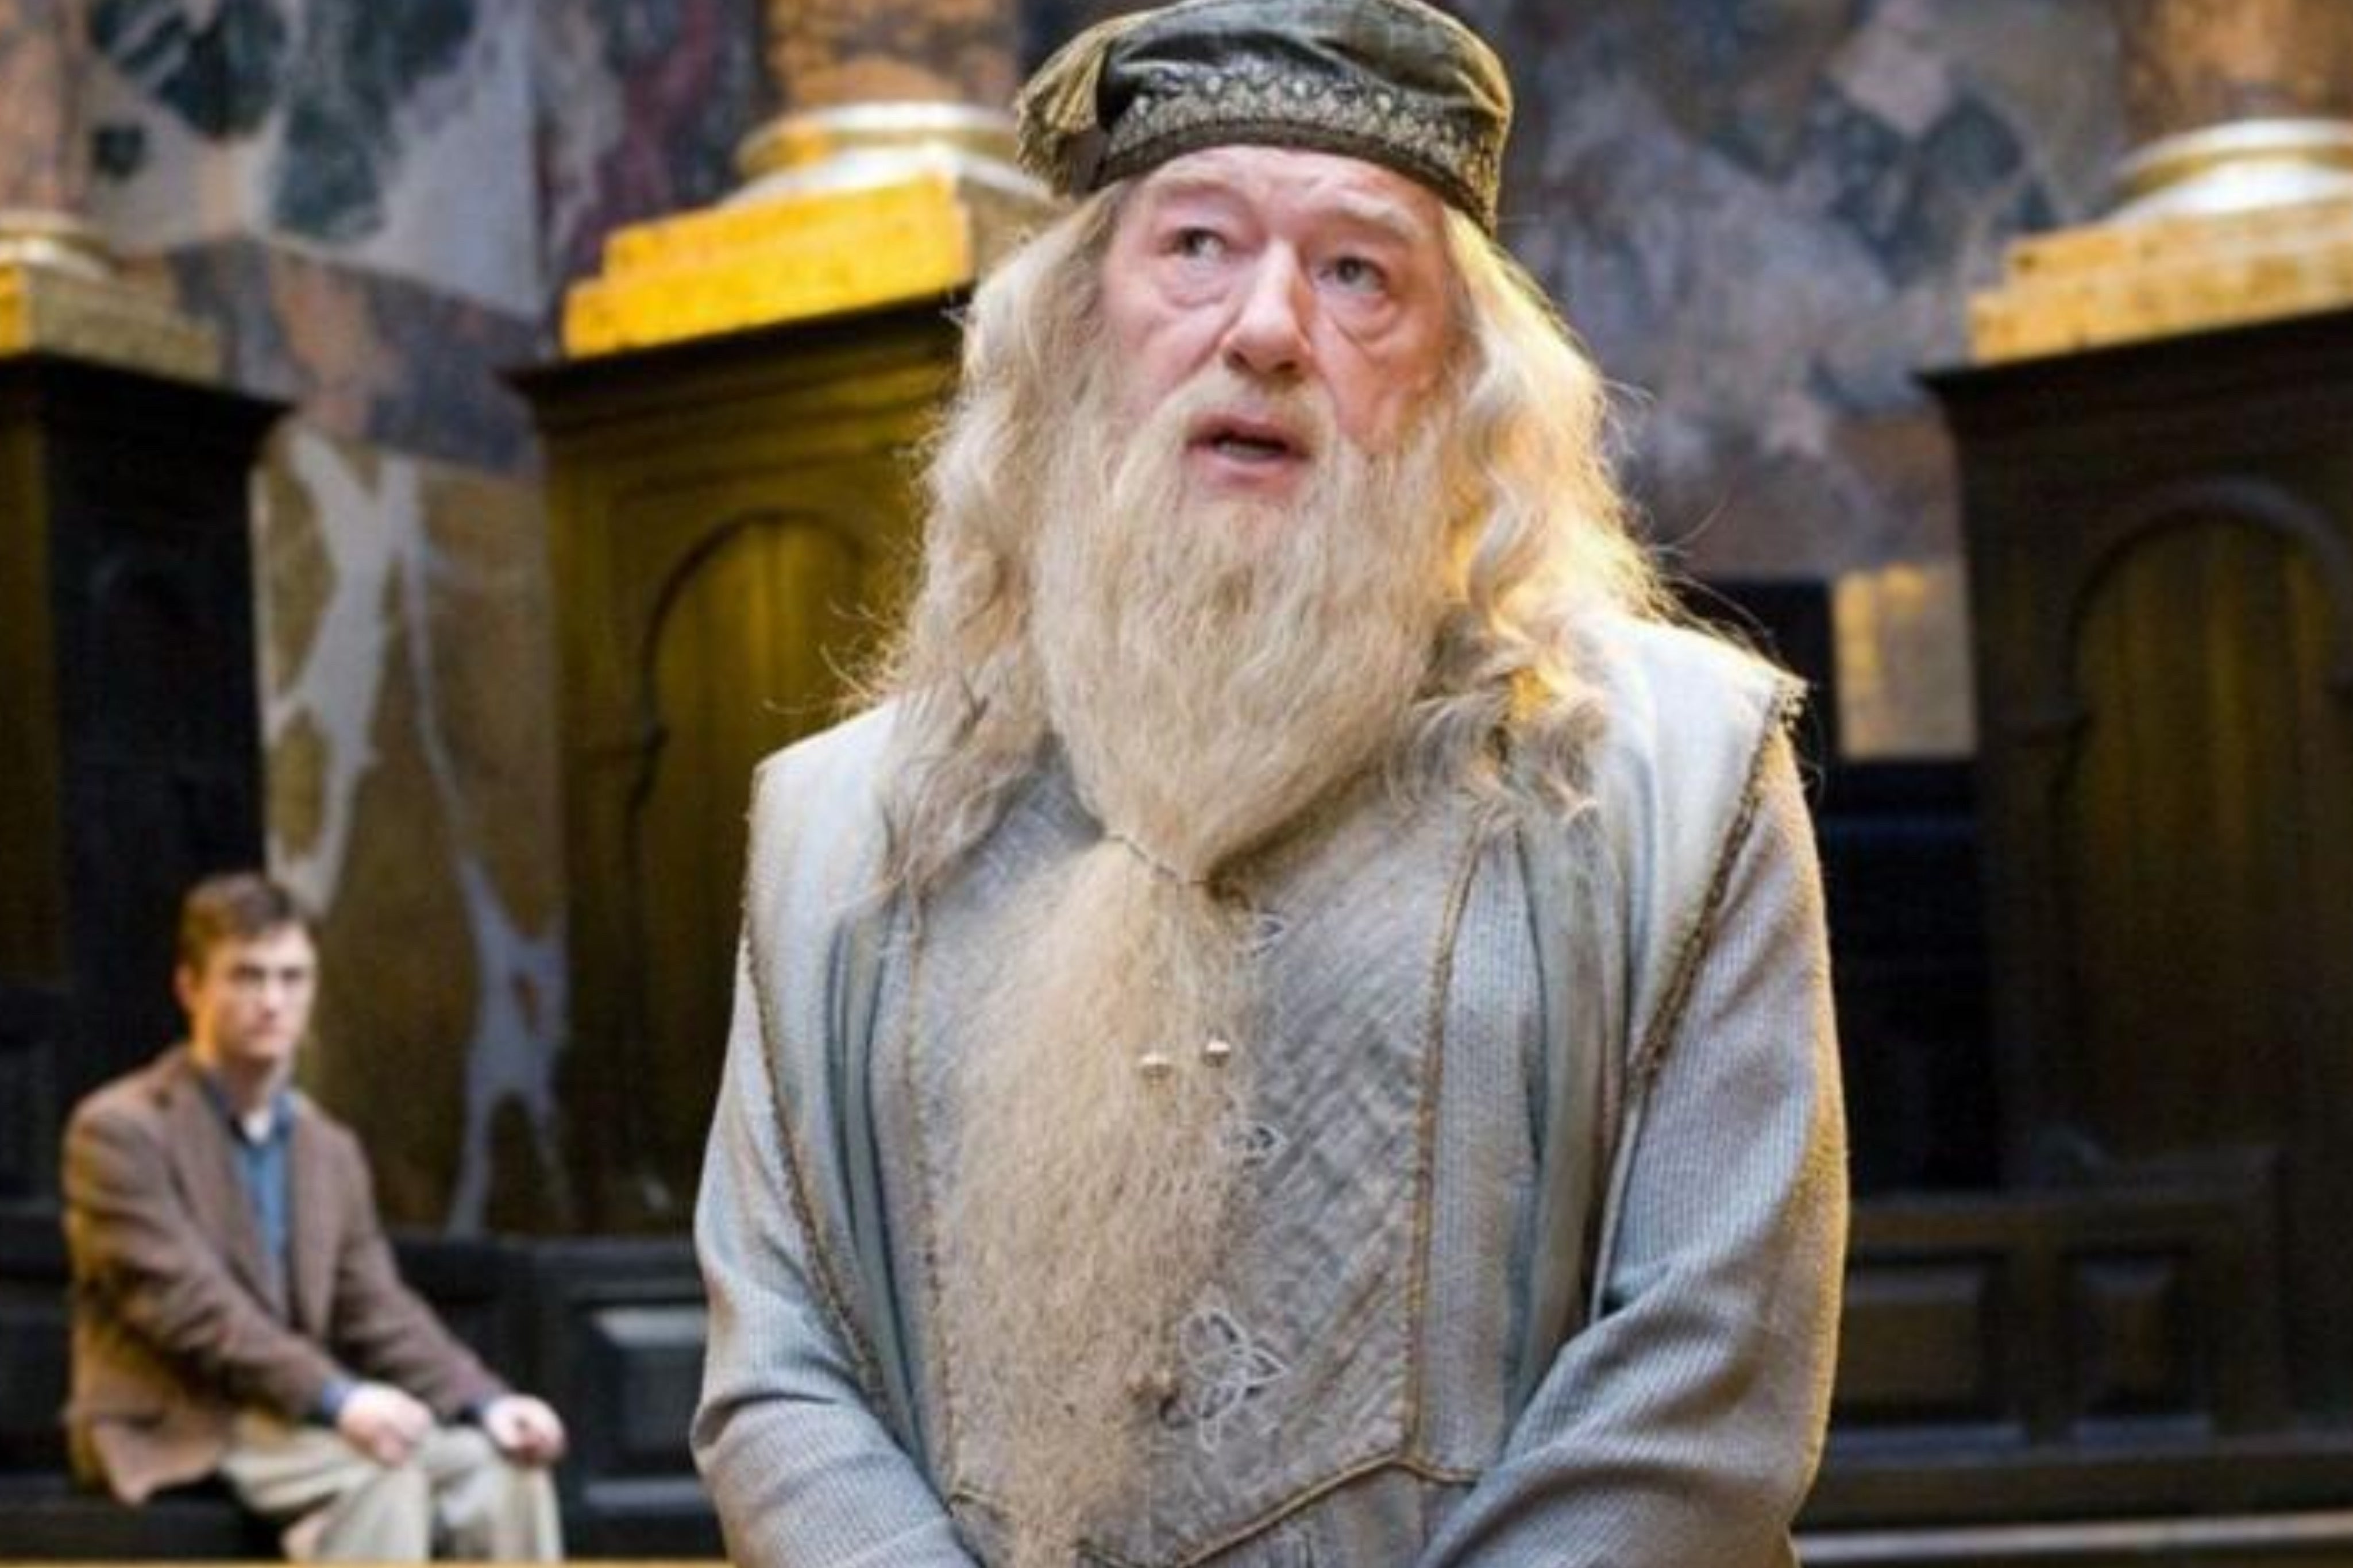 The Harry Potter world mourns the death of actor Michael Gambon (Dumbledore)